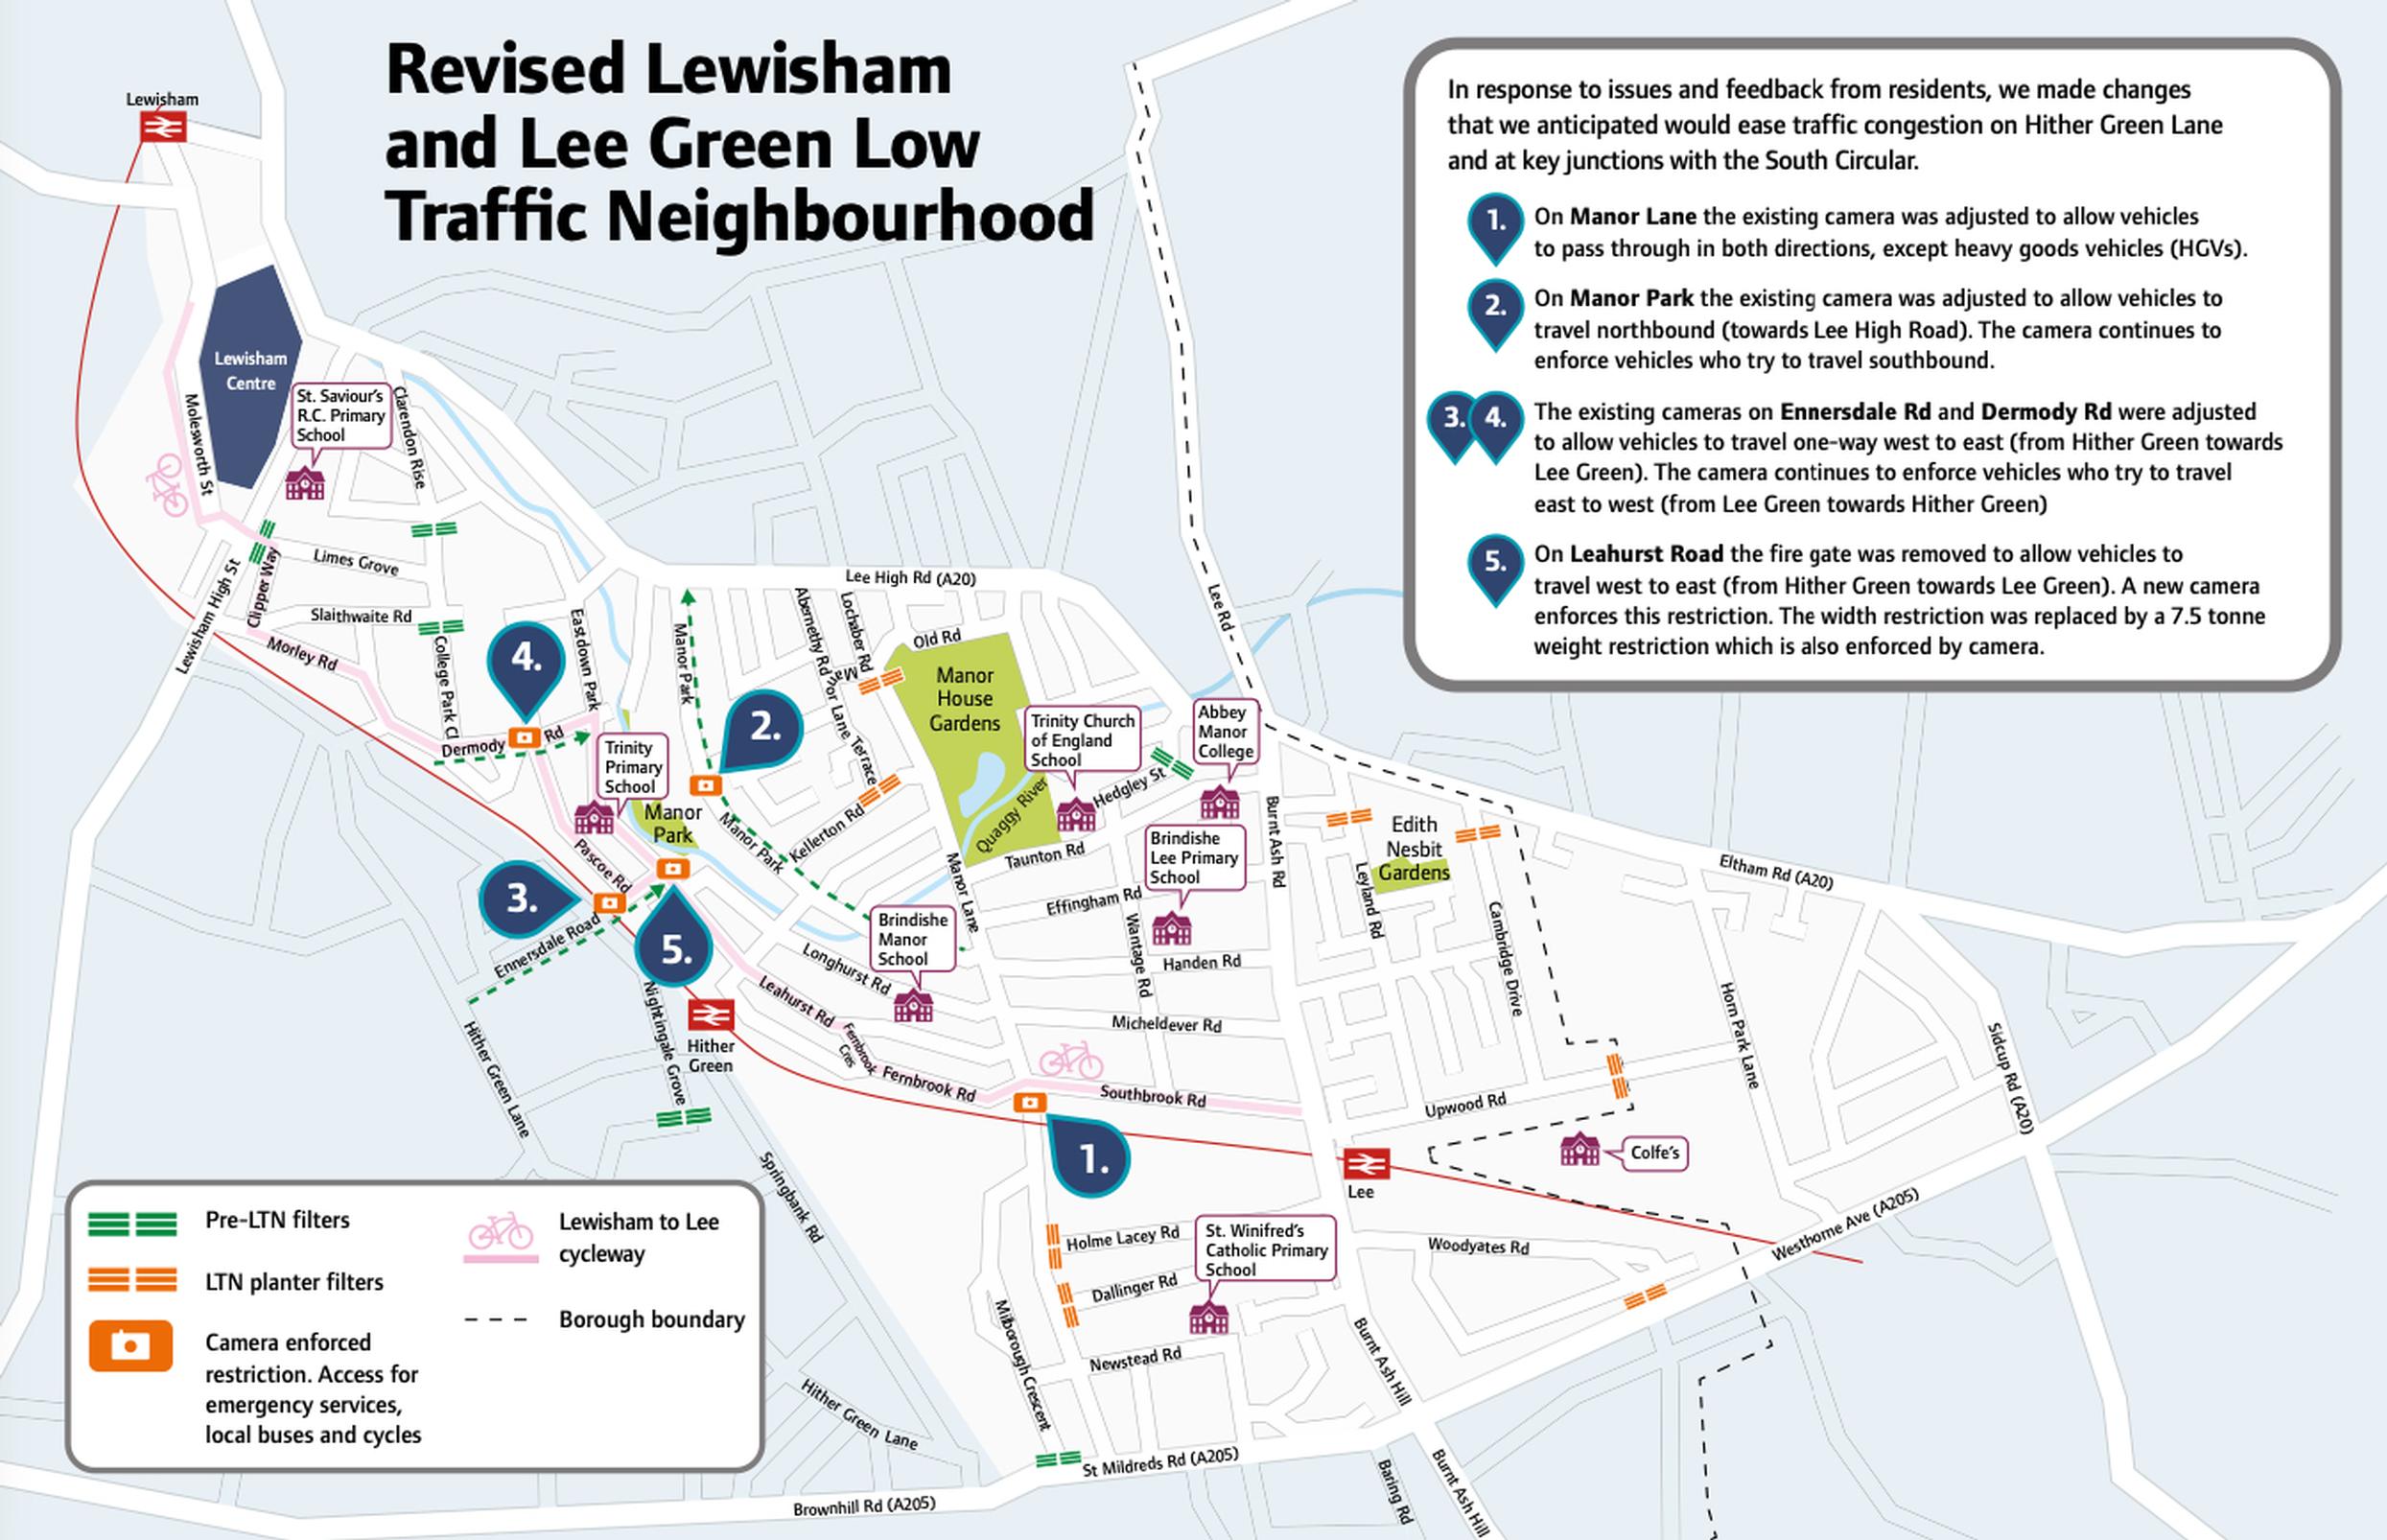 The Lewisham and Lee LTN was revised after resident feedback